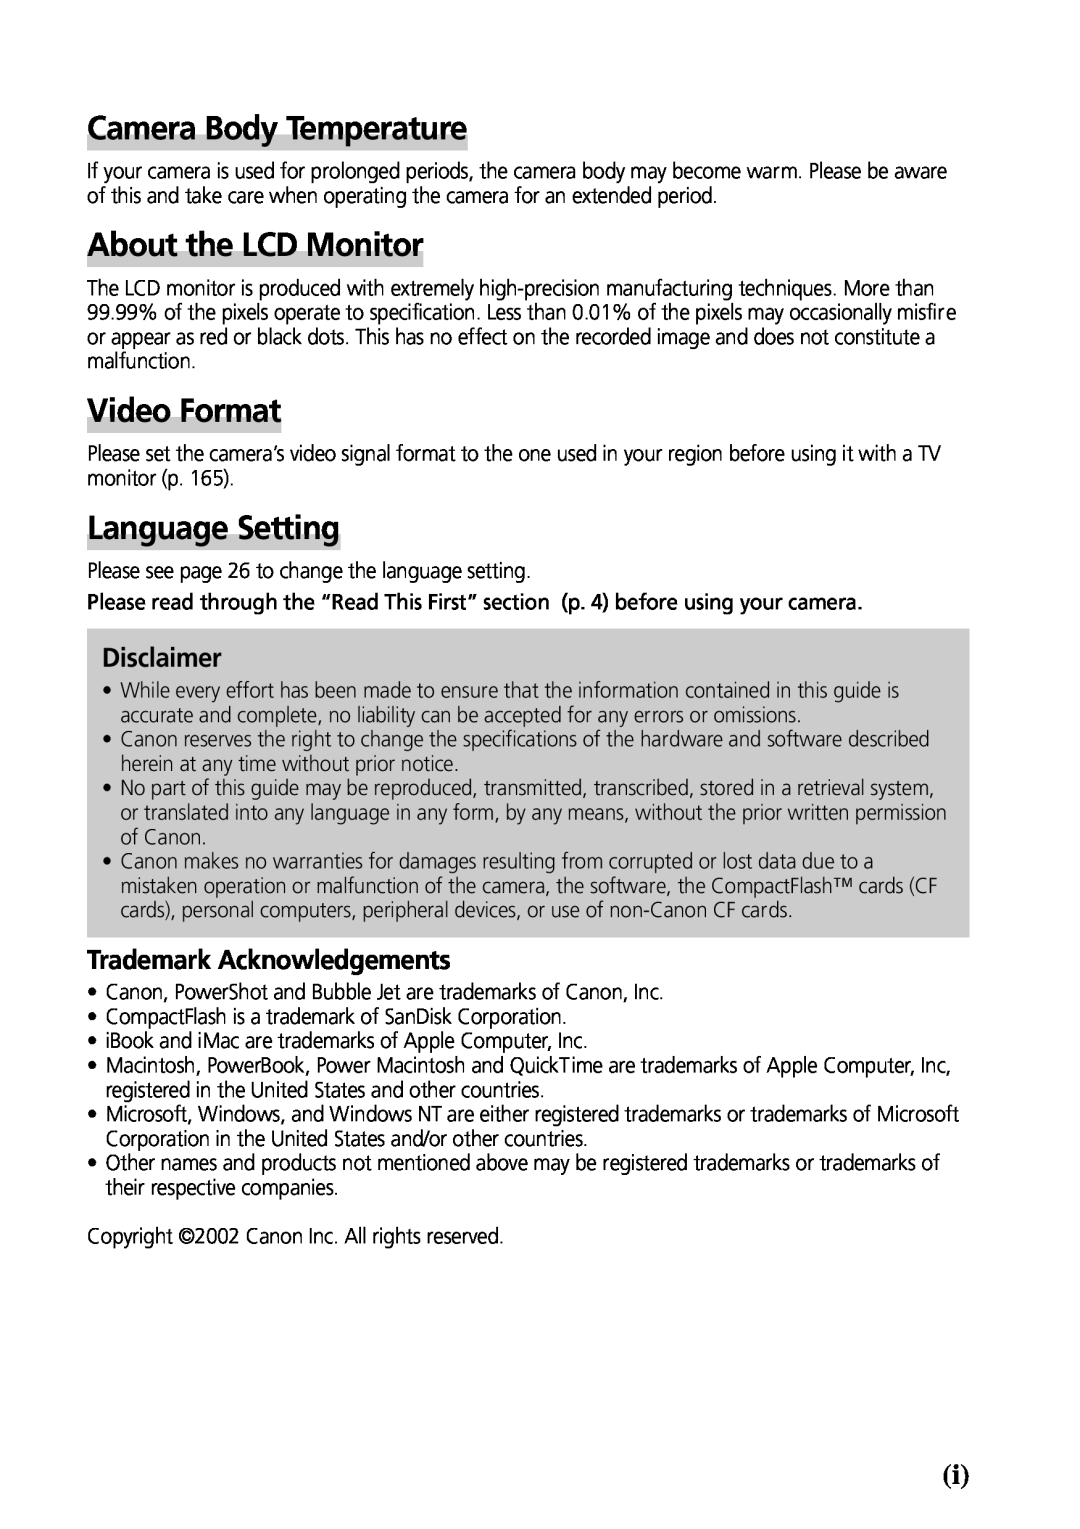 Canon G3 manual Camera Body Temperature, About the LCD Monitor, Video Format, Language Setting, Disclaimer 